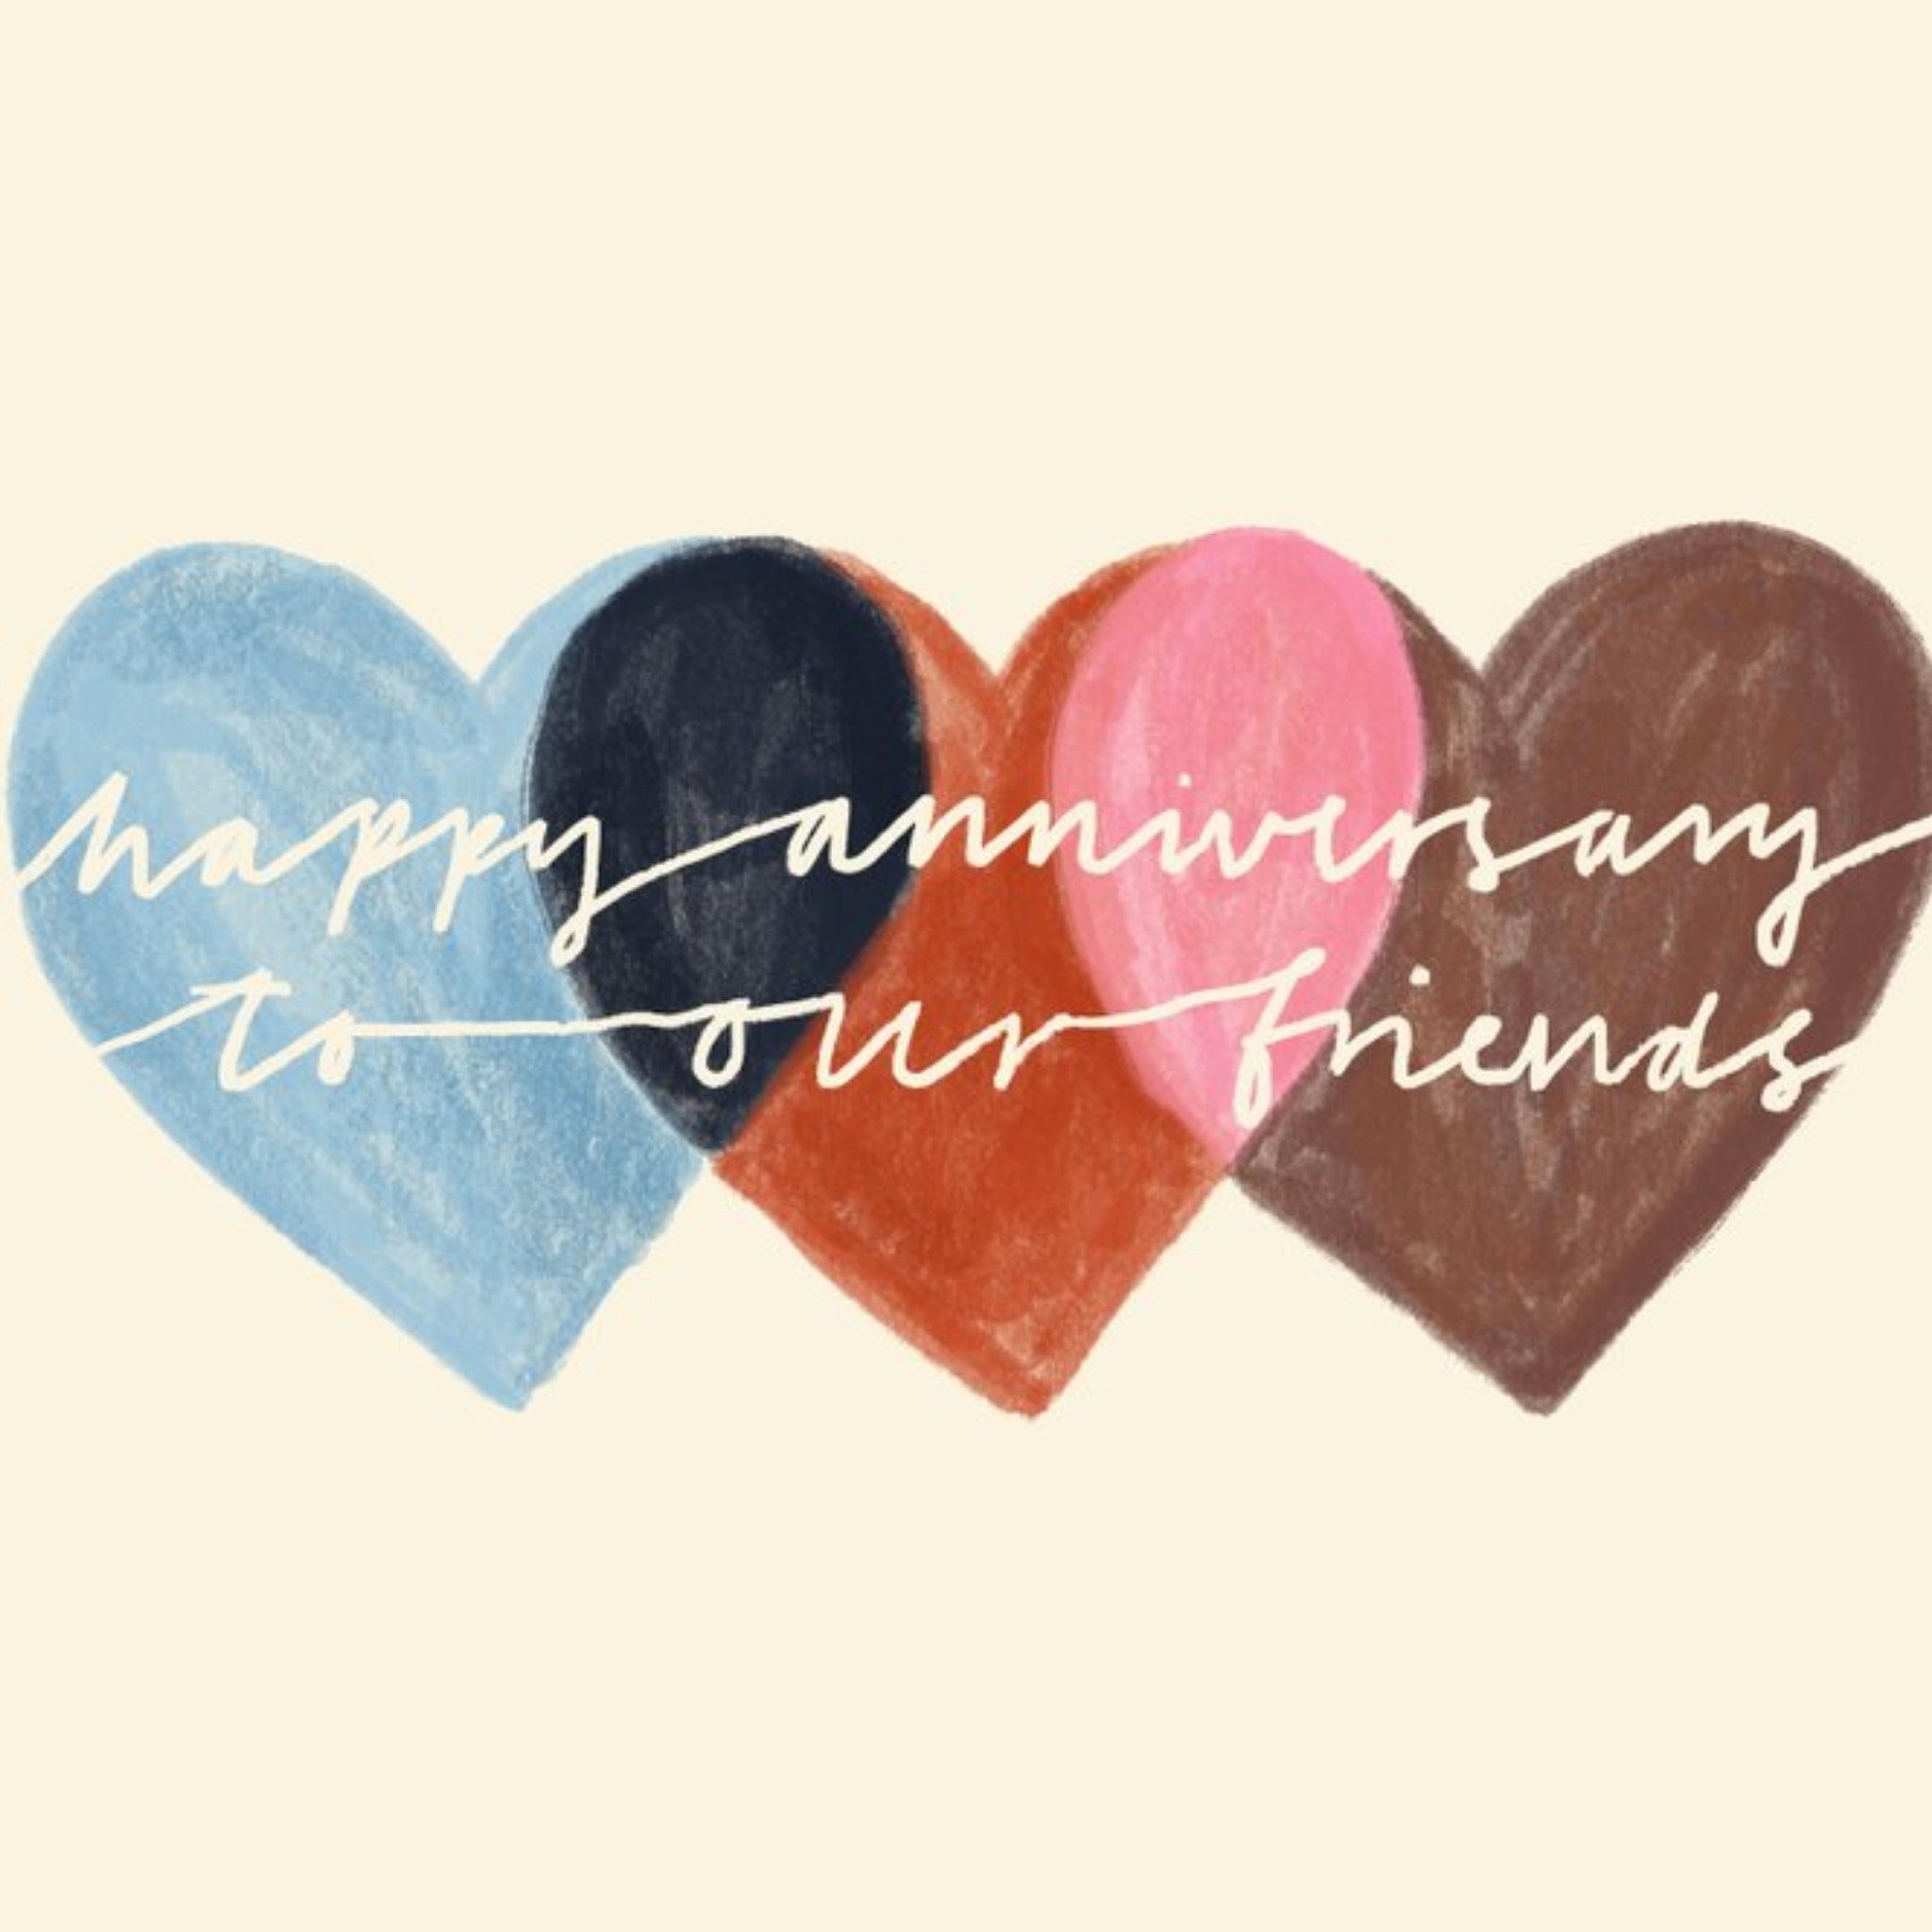 Moonpig Katy Welsh Hearts To Our Friends Happy Anniversary Card, Large